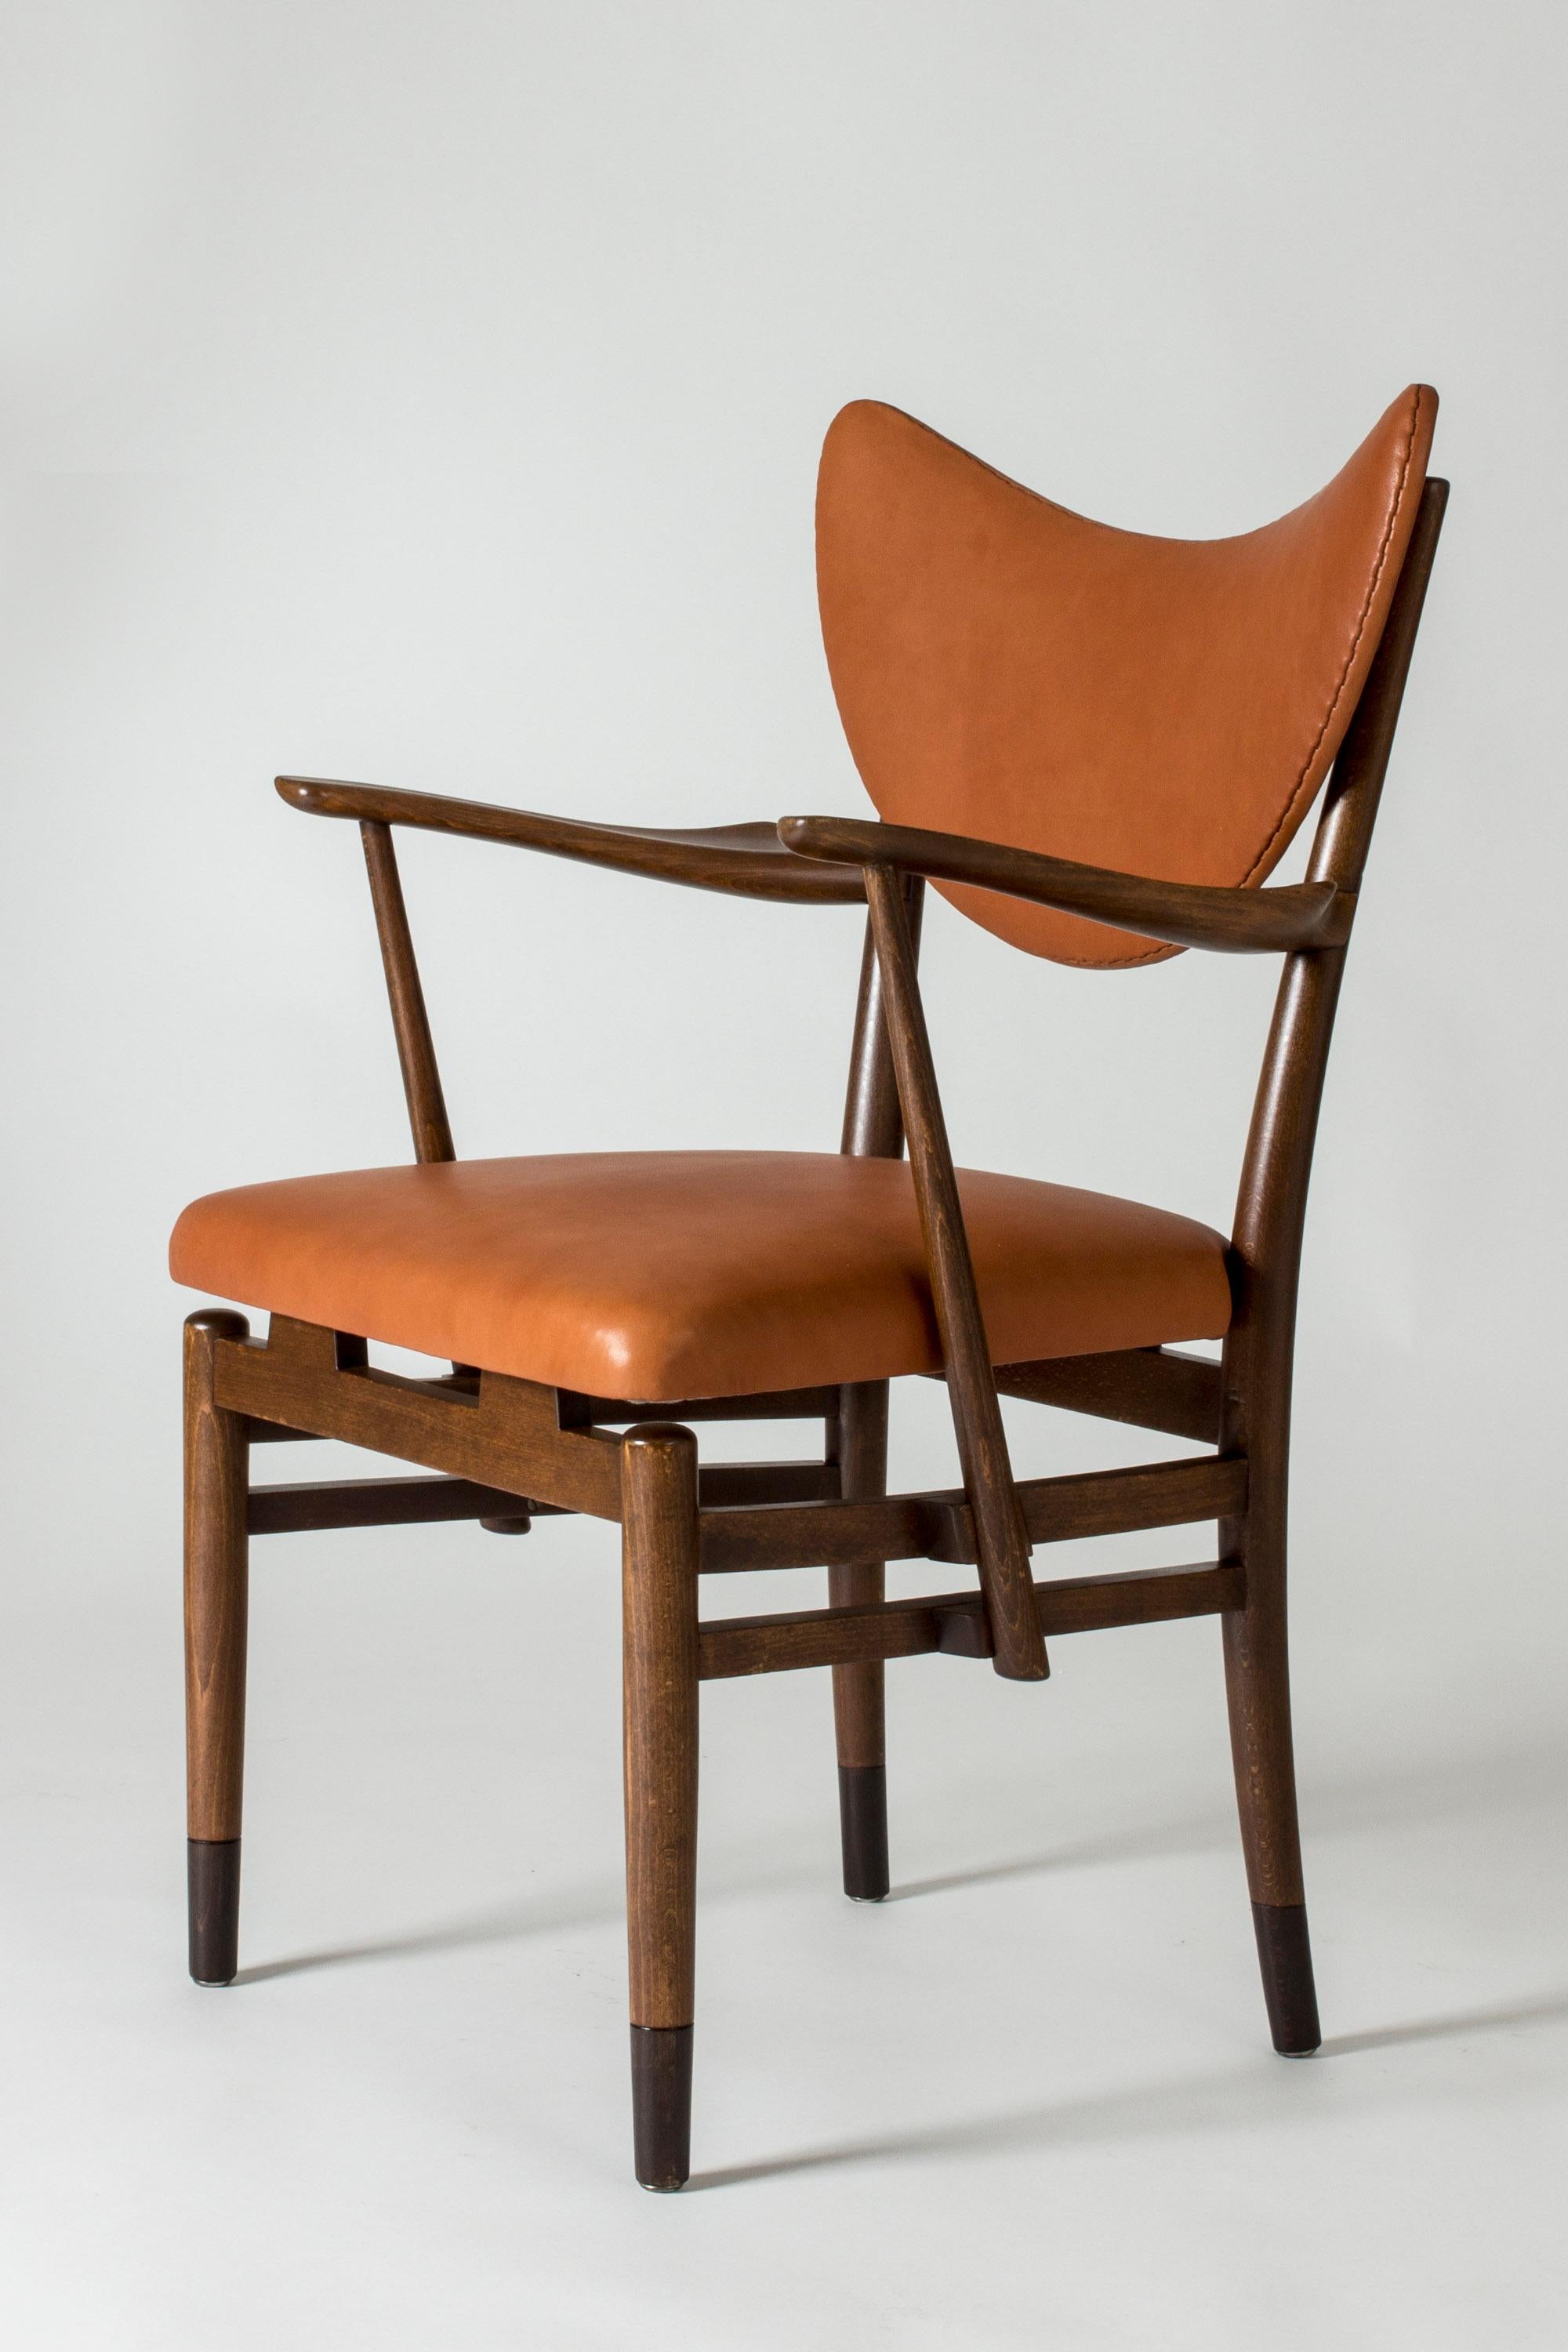 Scandinavian Modern Leather Armchair Attributed to Eva and Nils Koppel, Denmark, 1950s